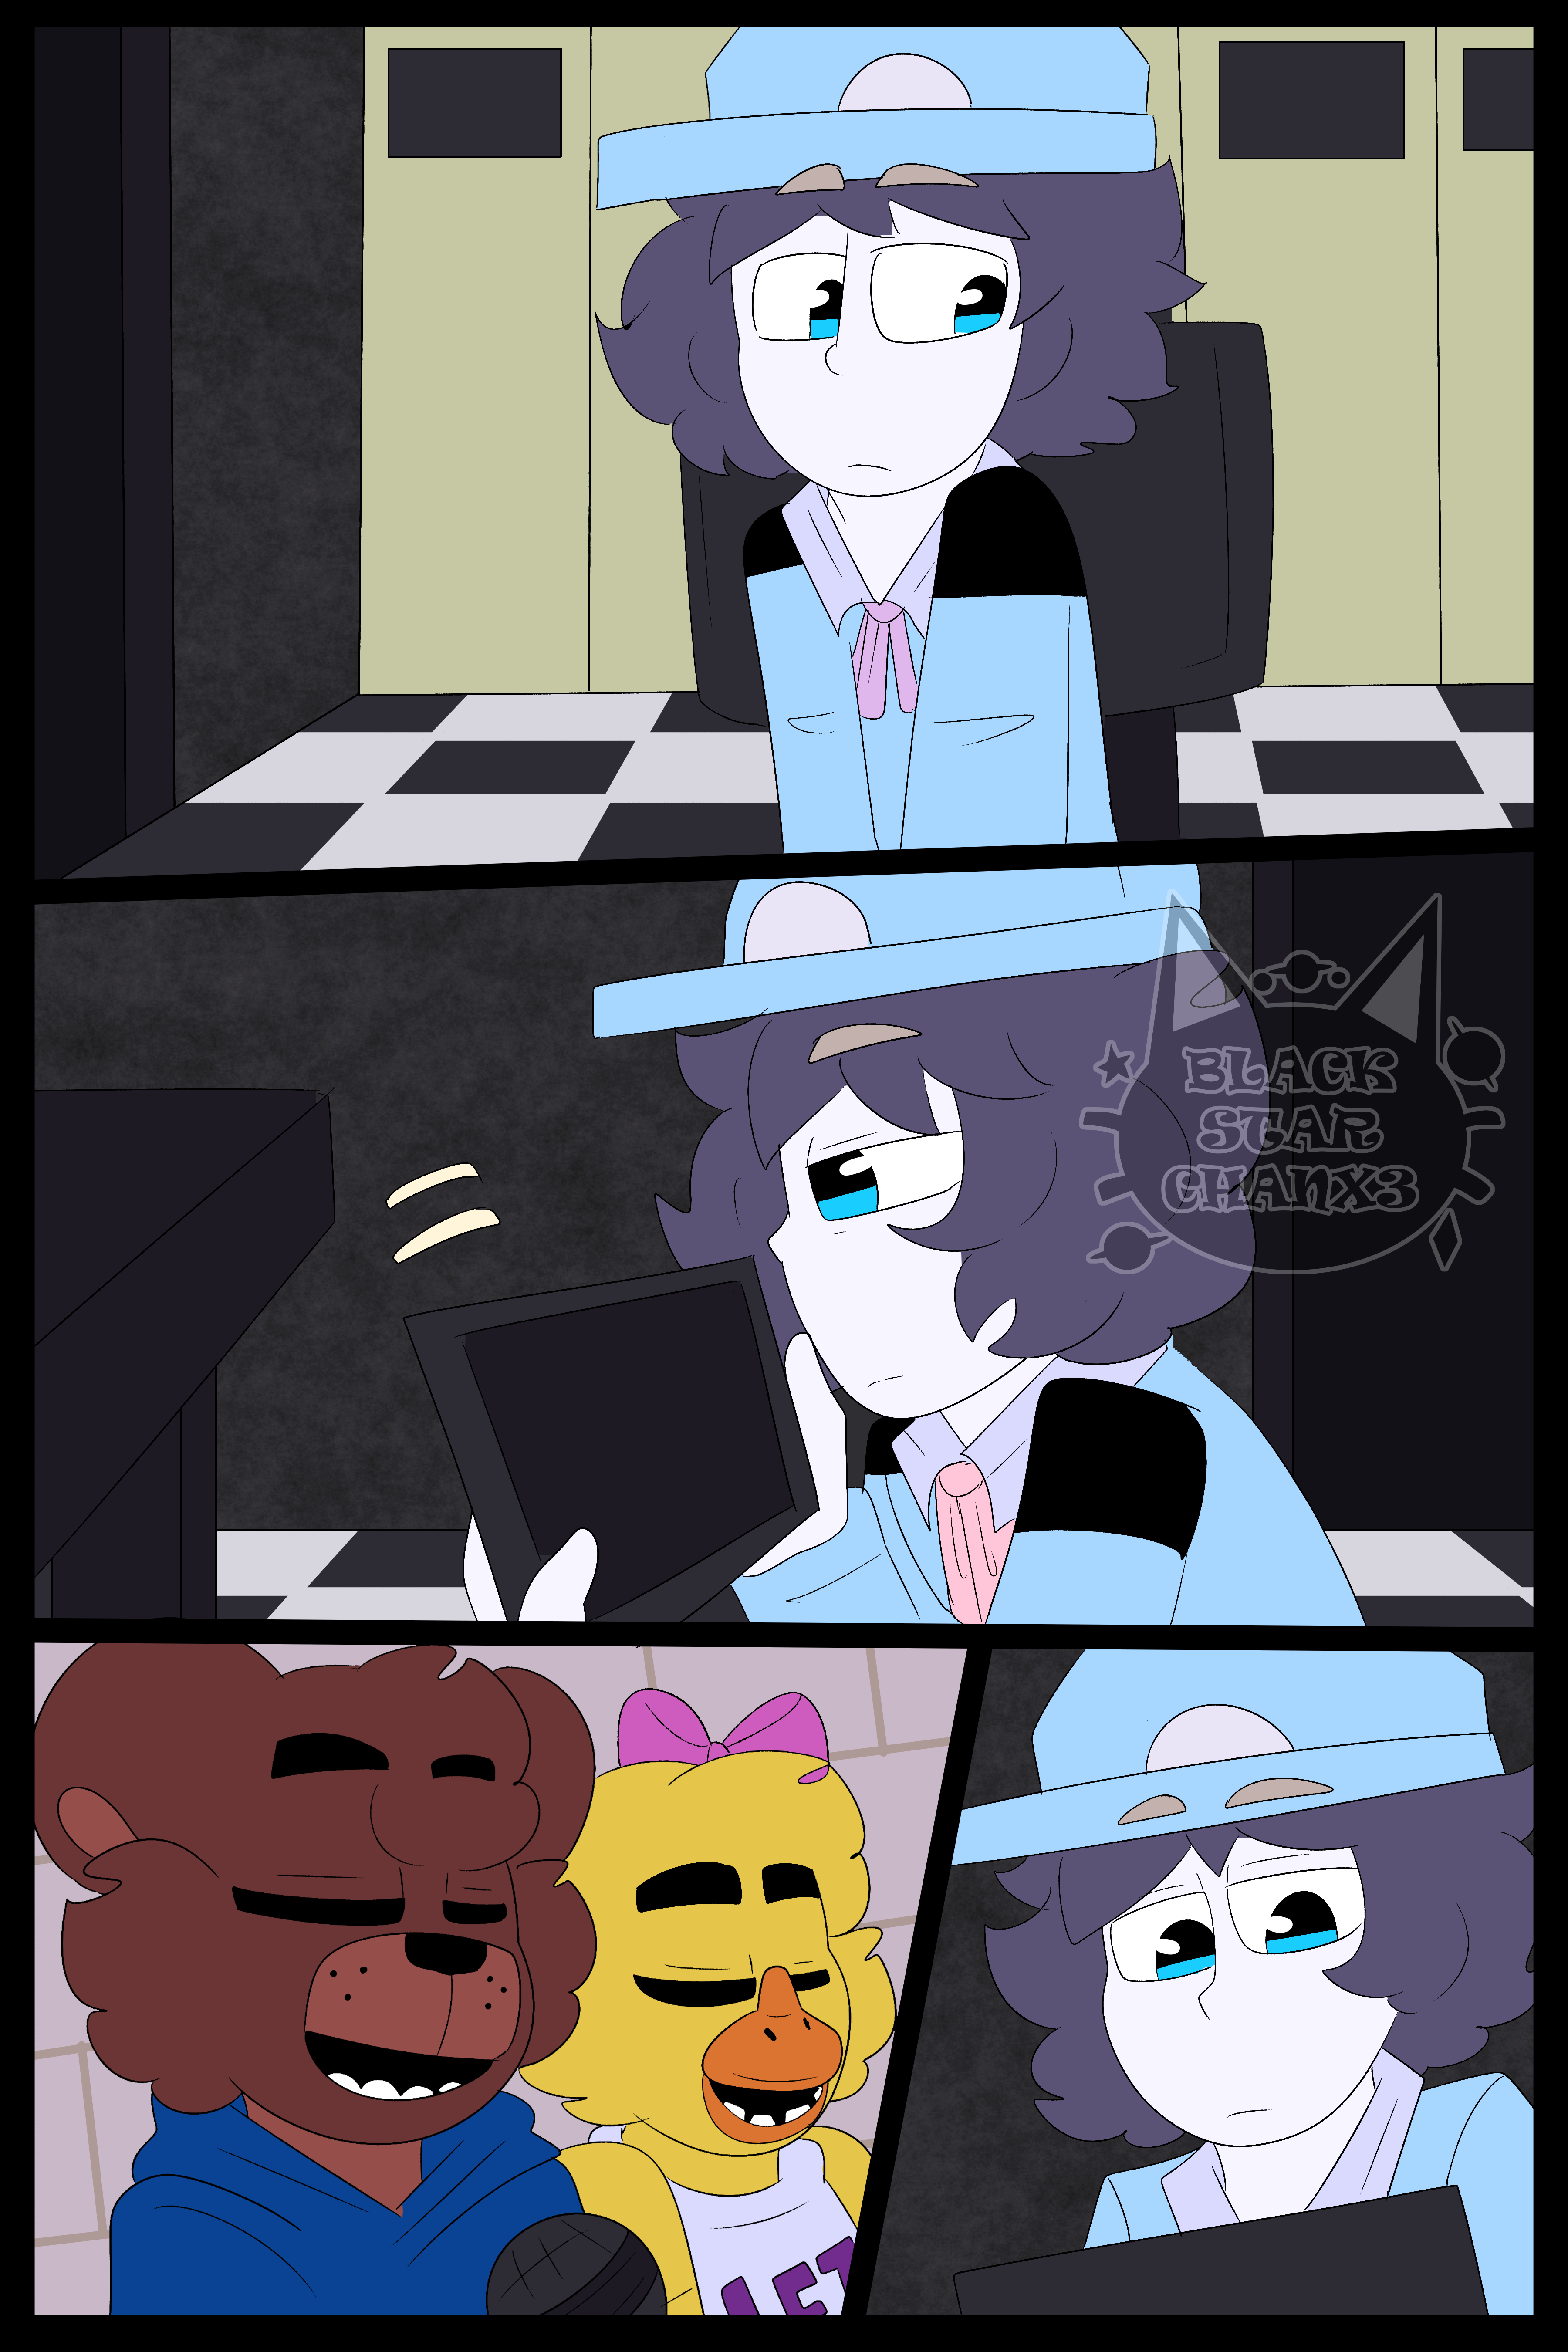 comix black by 1stf00t3r on DeviantArt